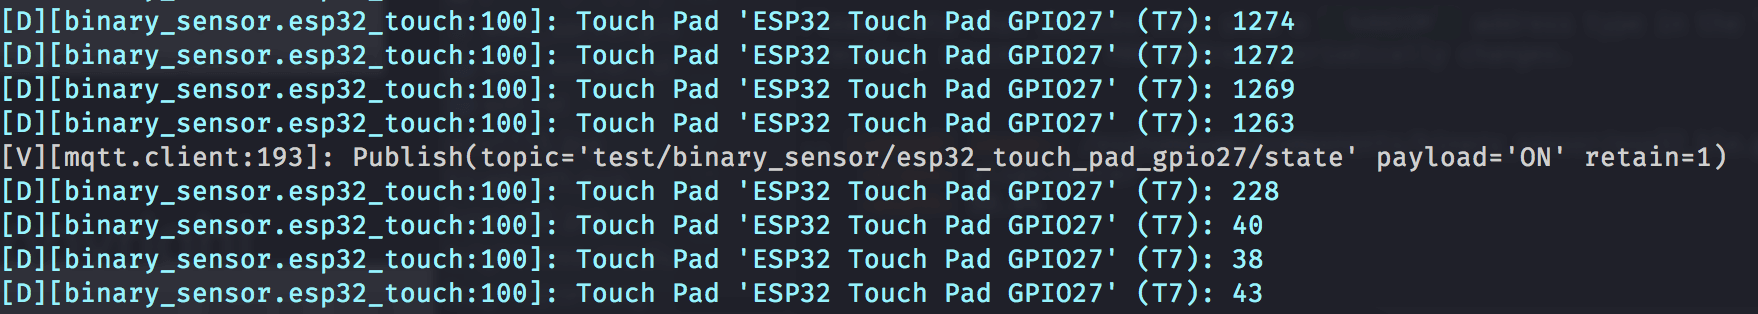 ../../_images/esp32_touch-finding_thresholds.png